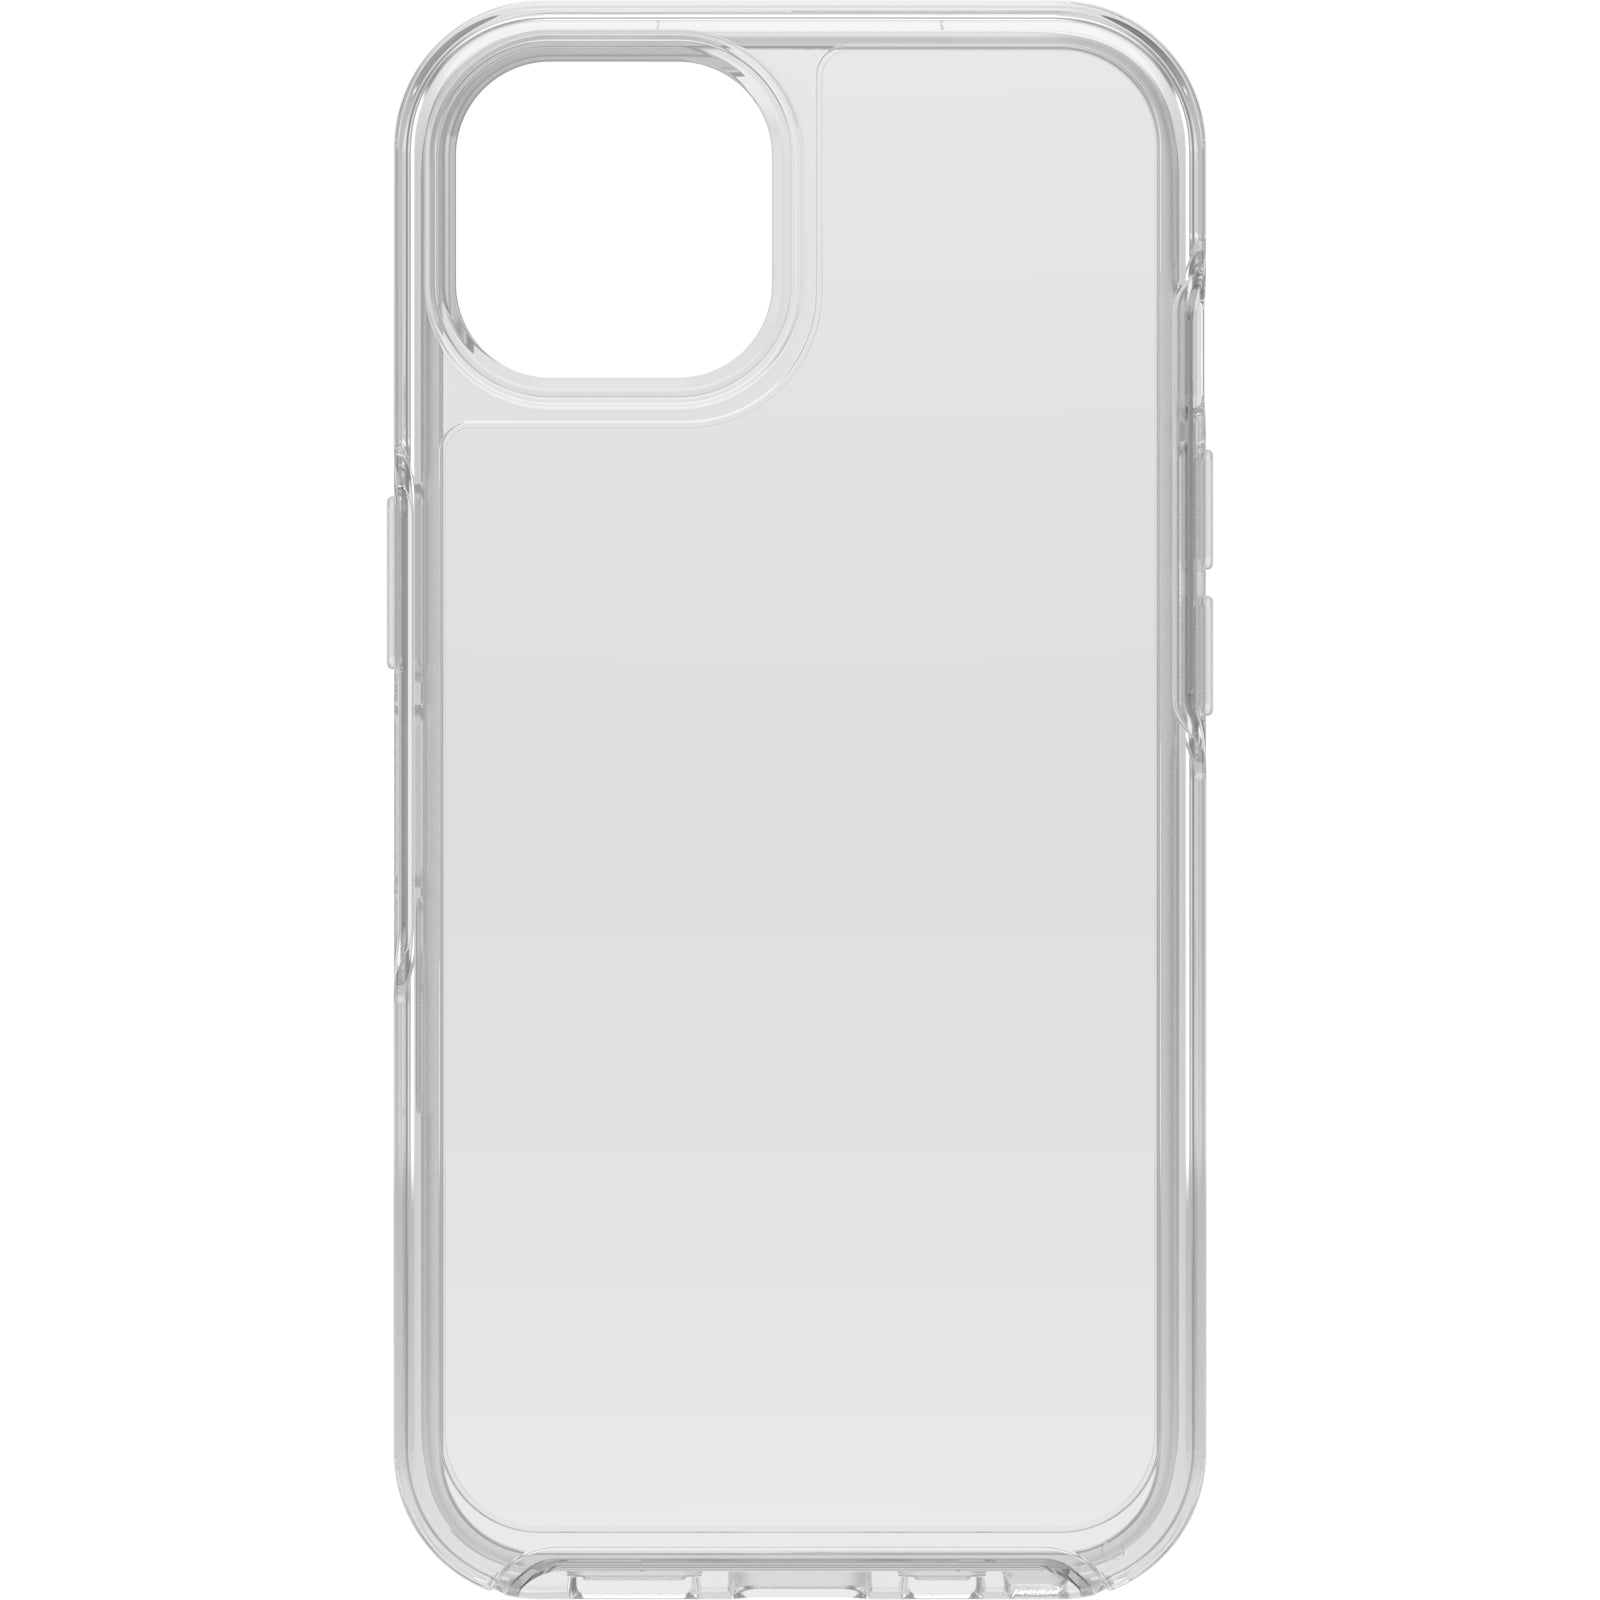 OTTERBOX Apple iPhone 13 Symmetry Series Clear Antimicrobial Case (77-85303) - Thin profile slips easily into tight pockets